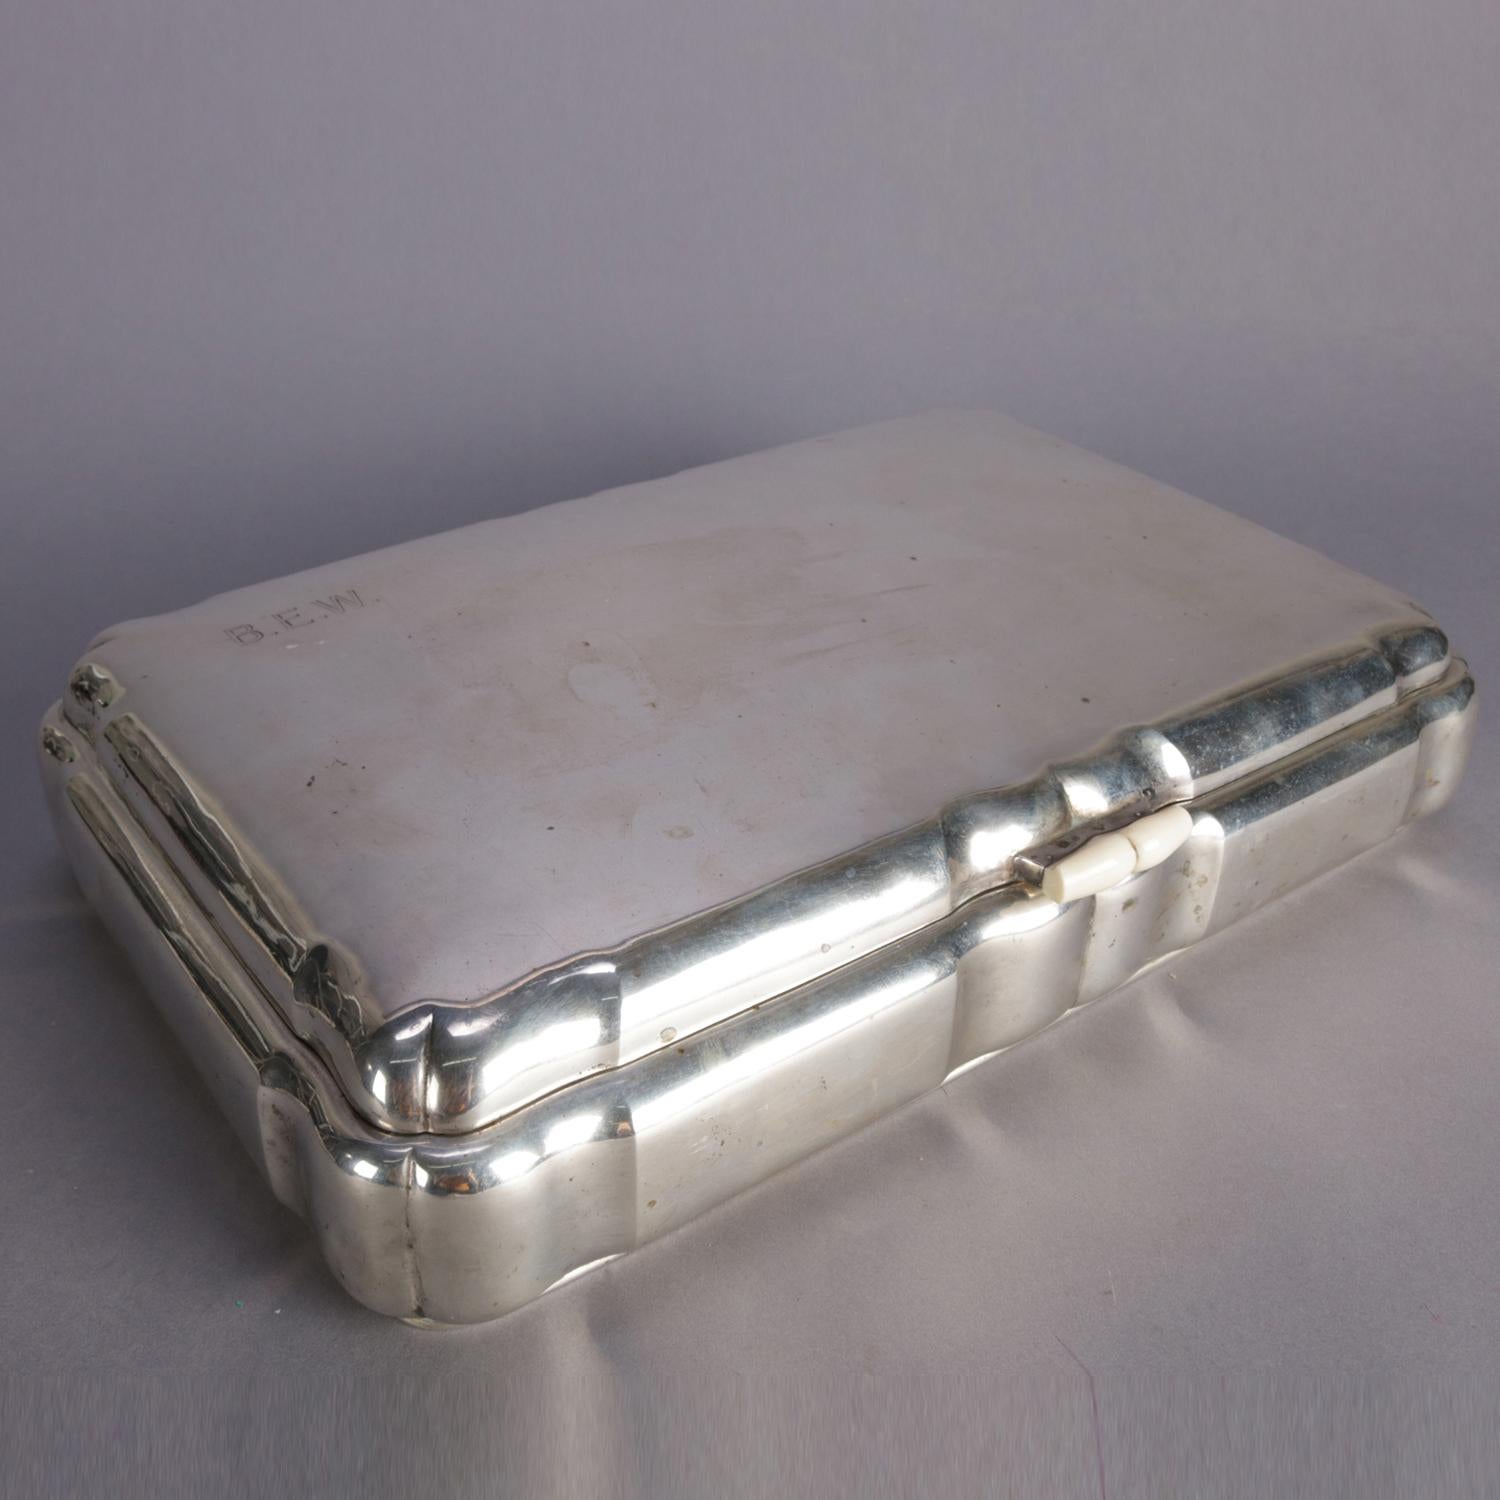 Czechoslovakian oversized cigar box features .800 silver construction with gold wash and mahogany interior, en verso hallmarks include .800 fineness silver, triangle with cross, three hills and FB maker Frantisek (Franz) Bibus, on lid B.E.W.